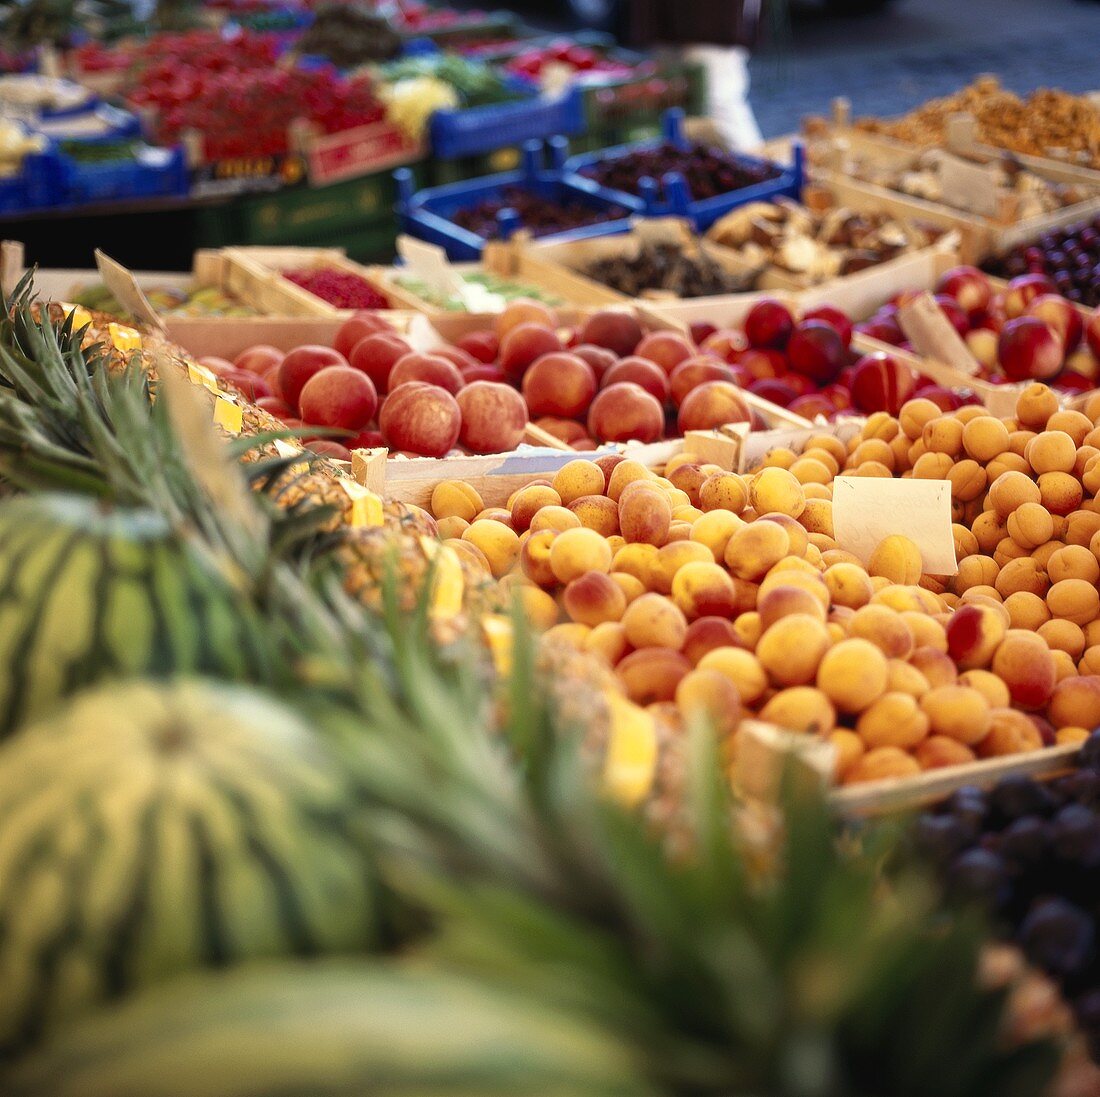 Fresh fruit, including apricots, at the market